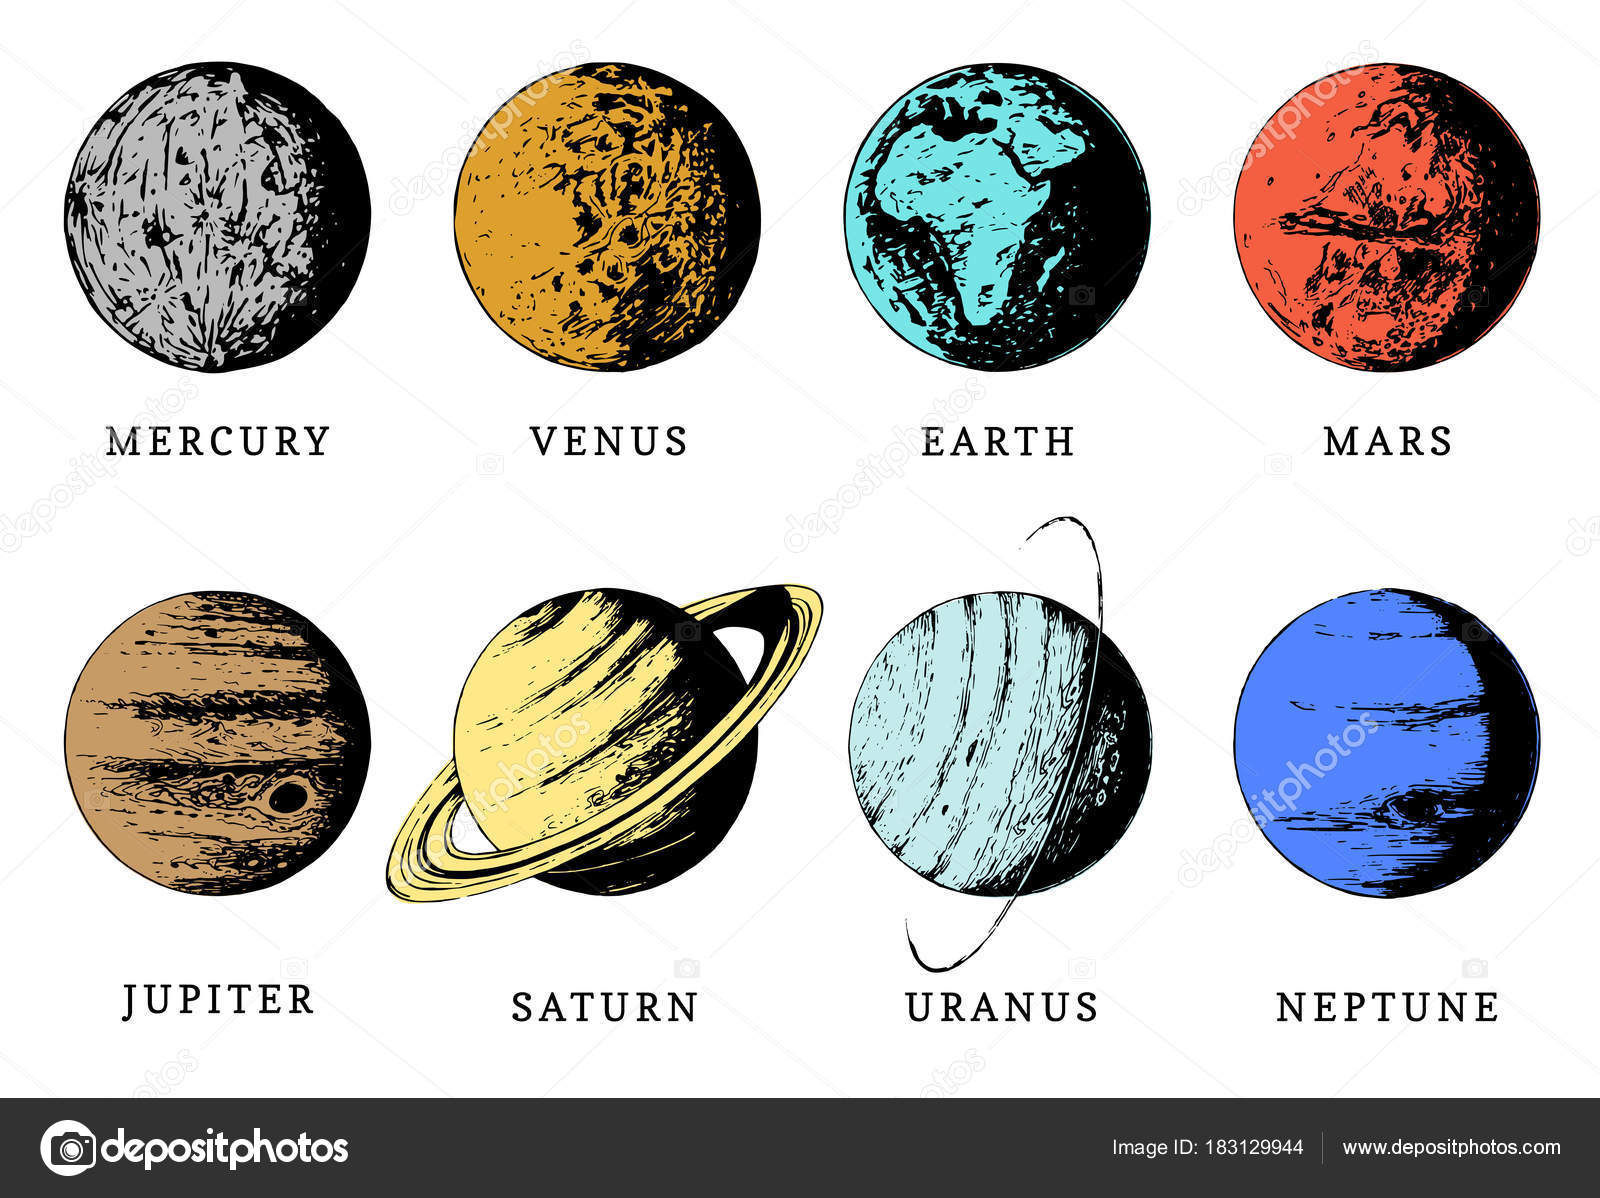 what planets is the color